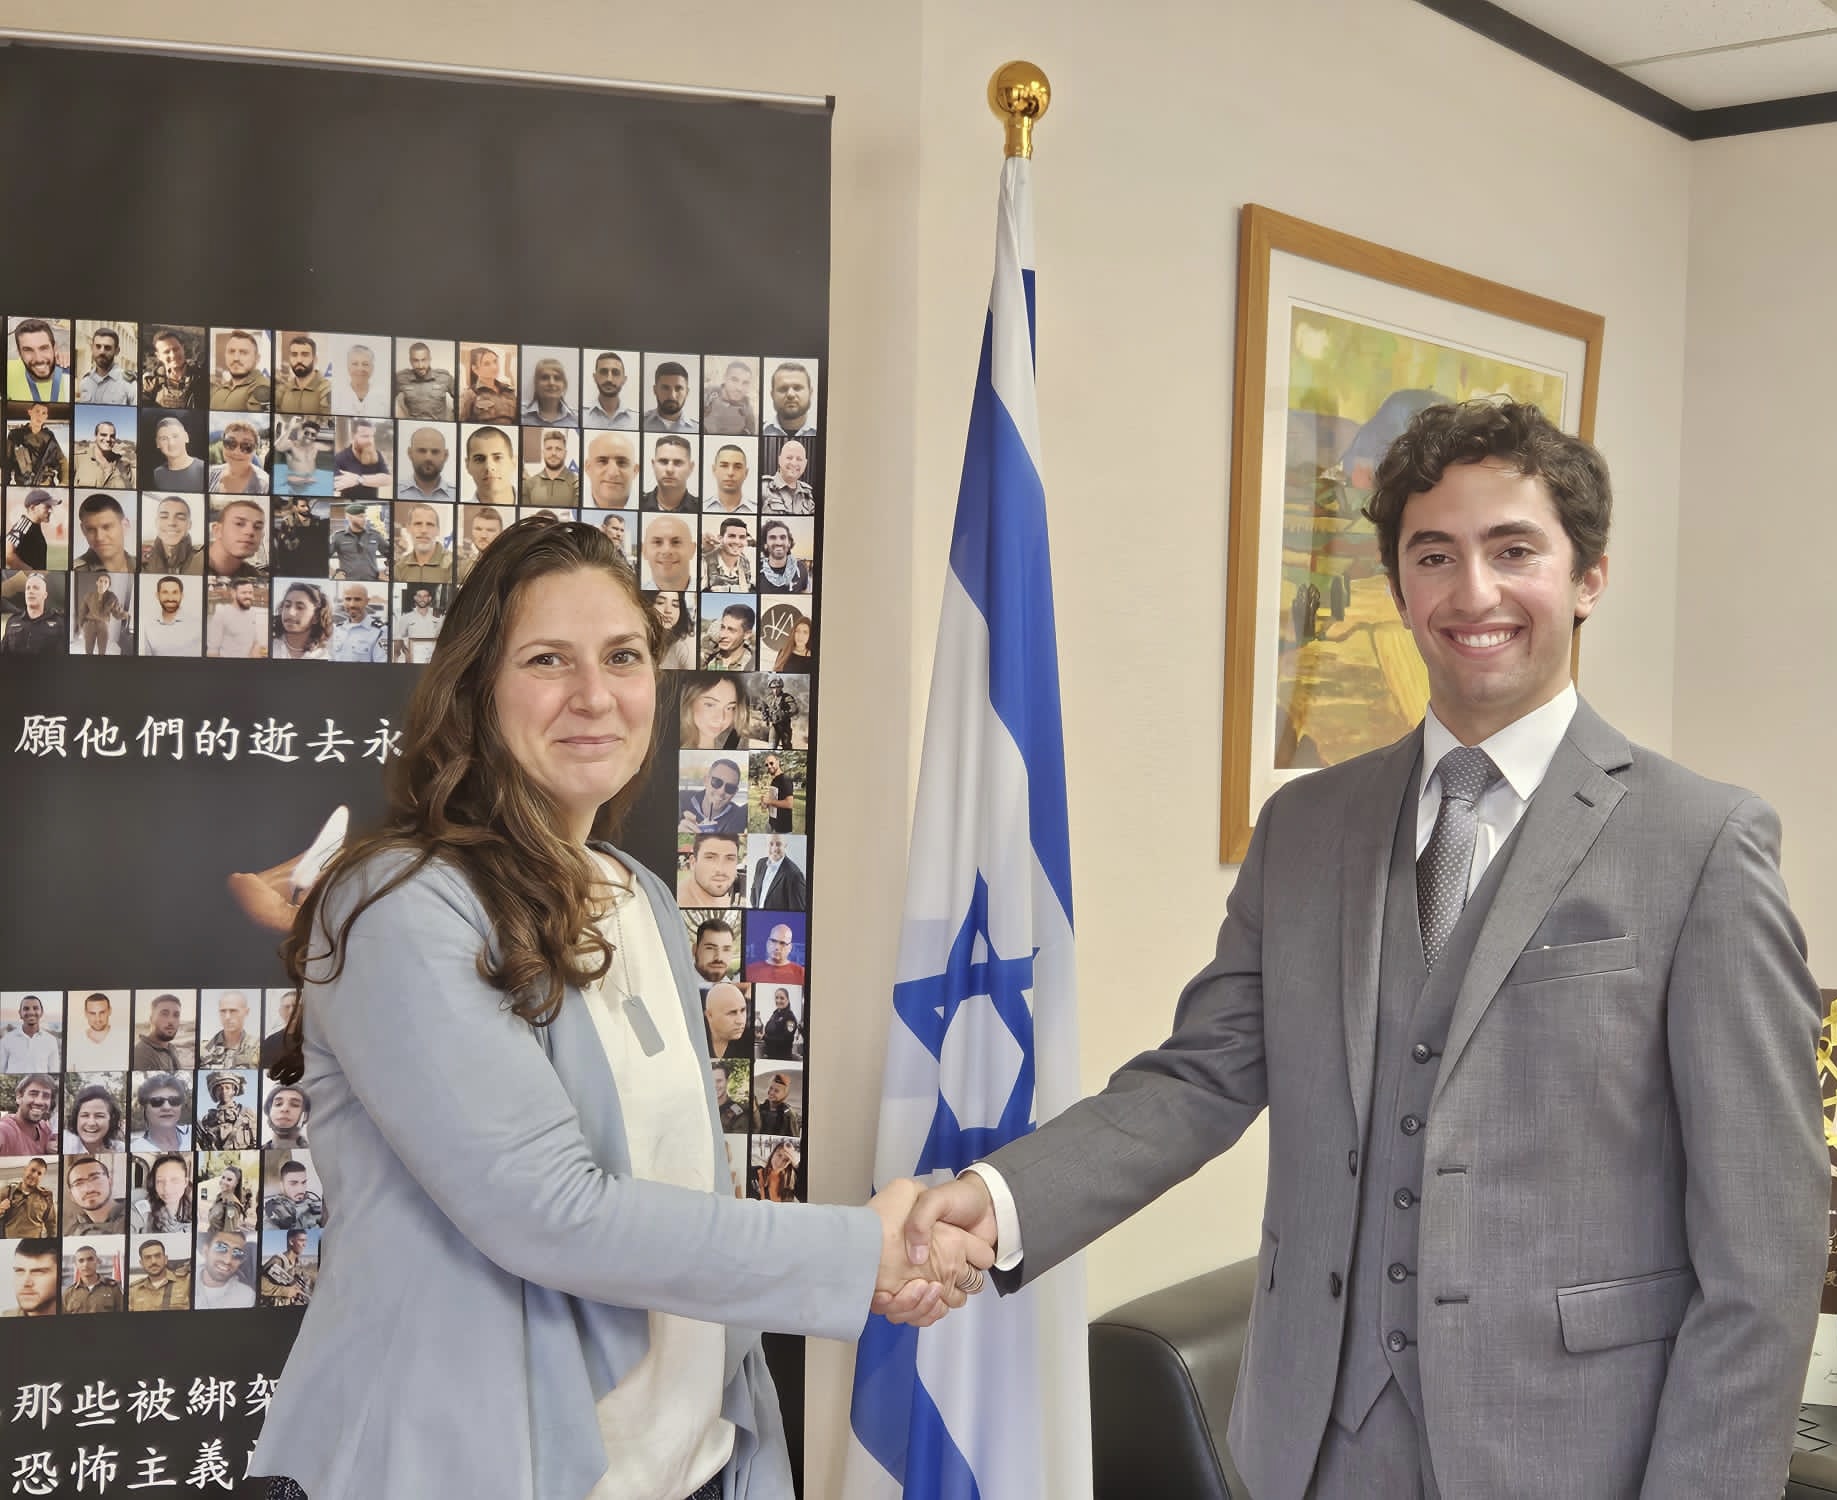 A Terp’s Interview with Israel’s Representative to Taiwan